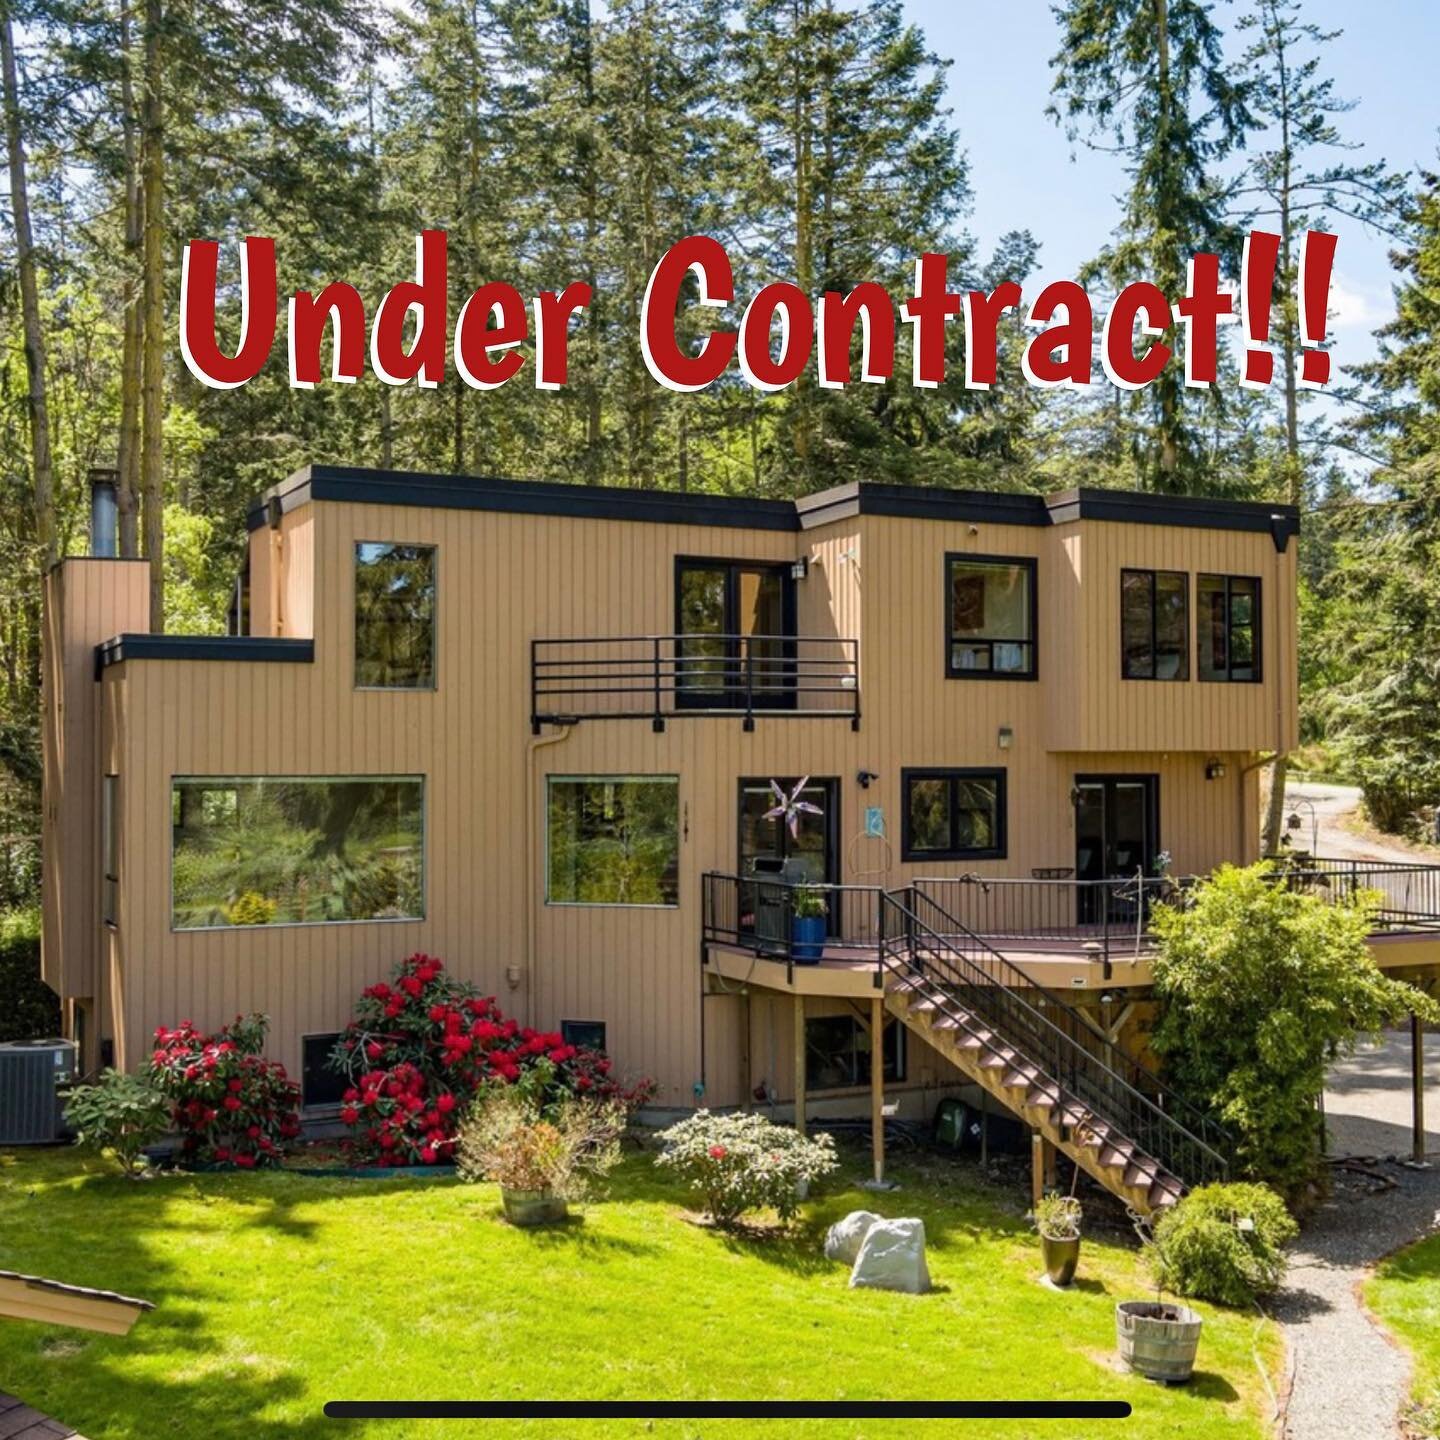 Under Contract on Whidbey! 
🤘🏽✨👏🏽😊
So excited for my buyers who have looked for more than 3 years for a dreamy second getaway home! 
We found it on Whidbey and it was the back up house we toured after we spent 7 minutes in the target house. 
I t